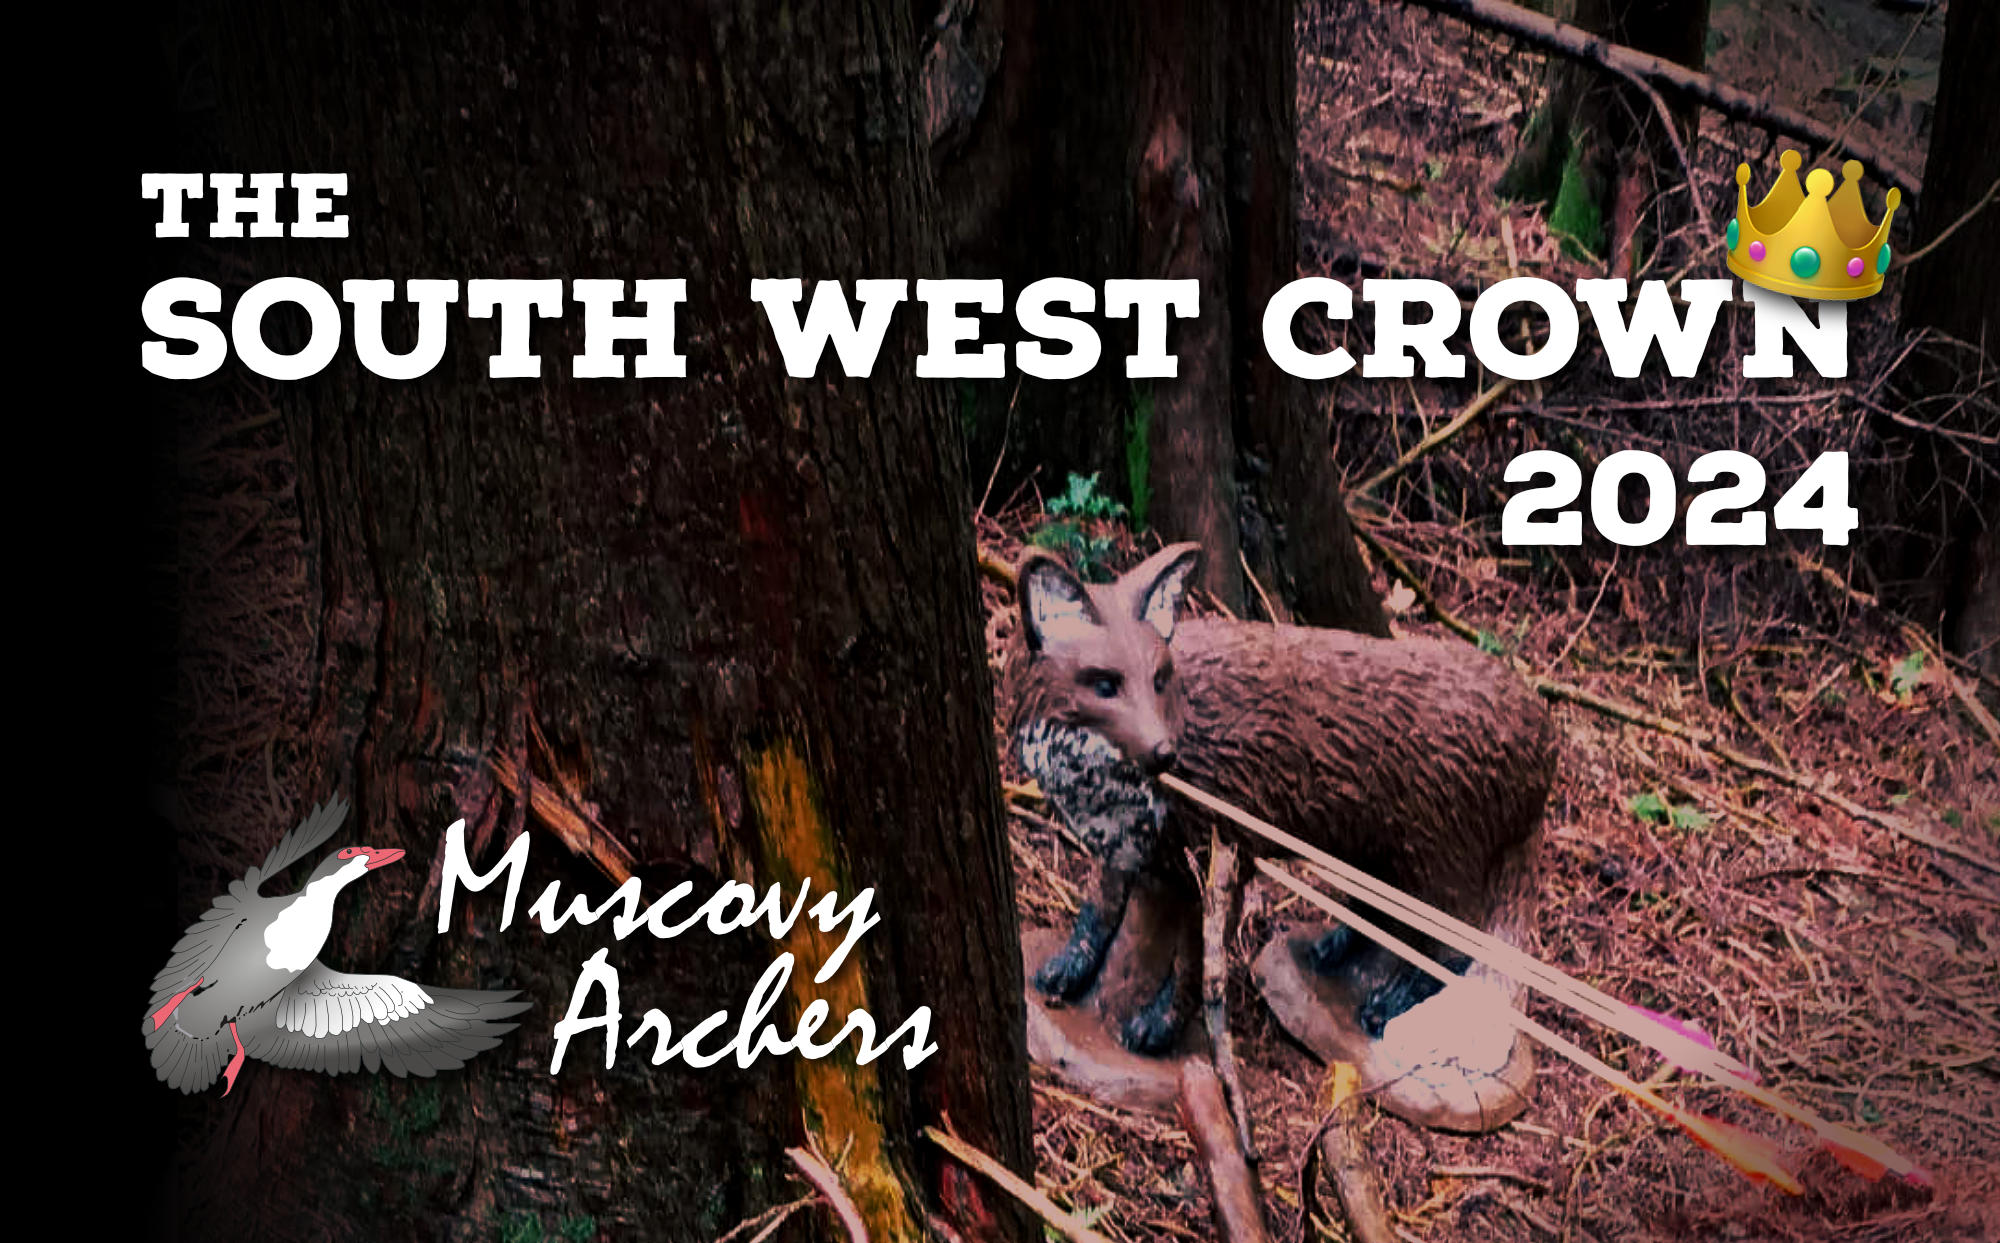 The South West Crown 2024 hosted by Muscovy Archers